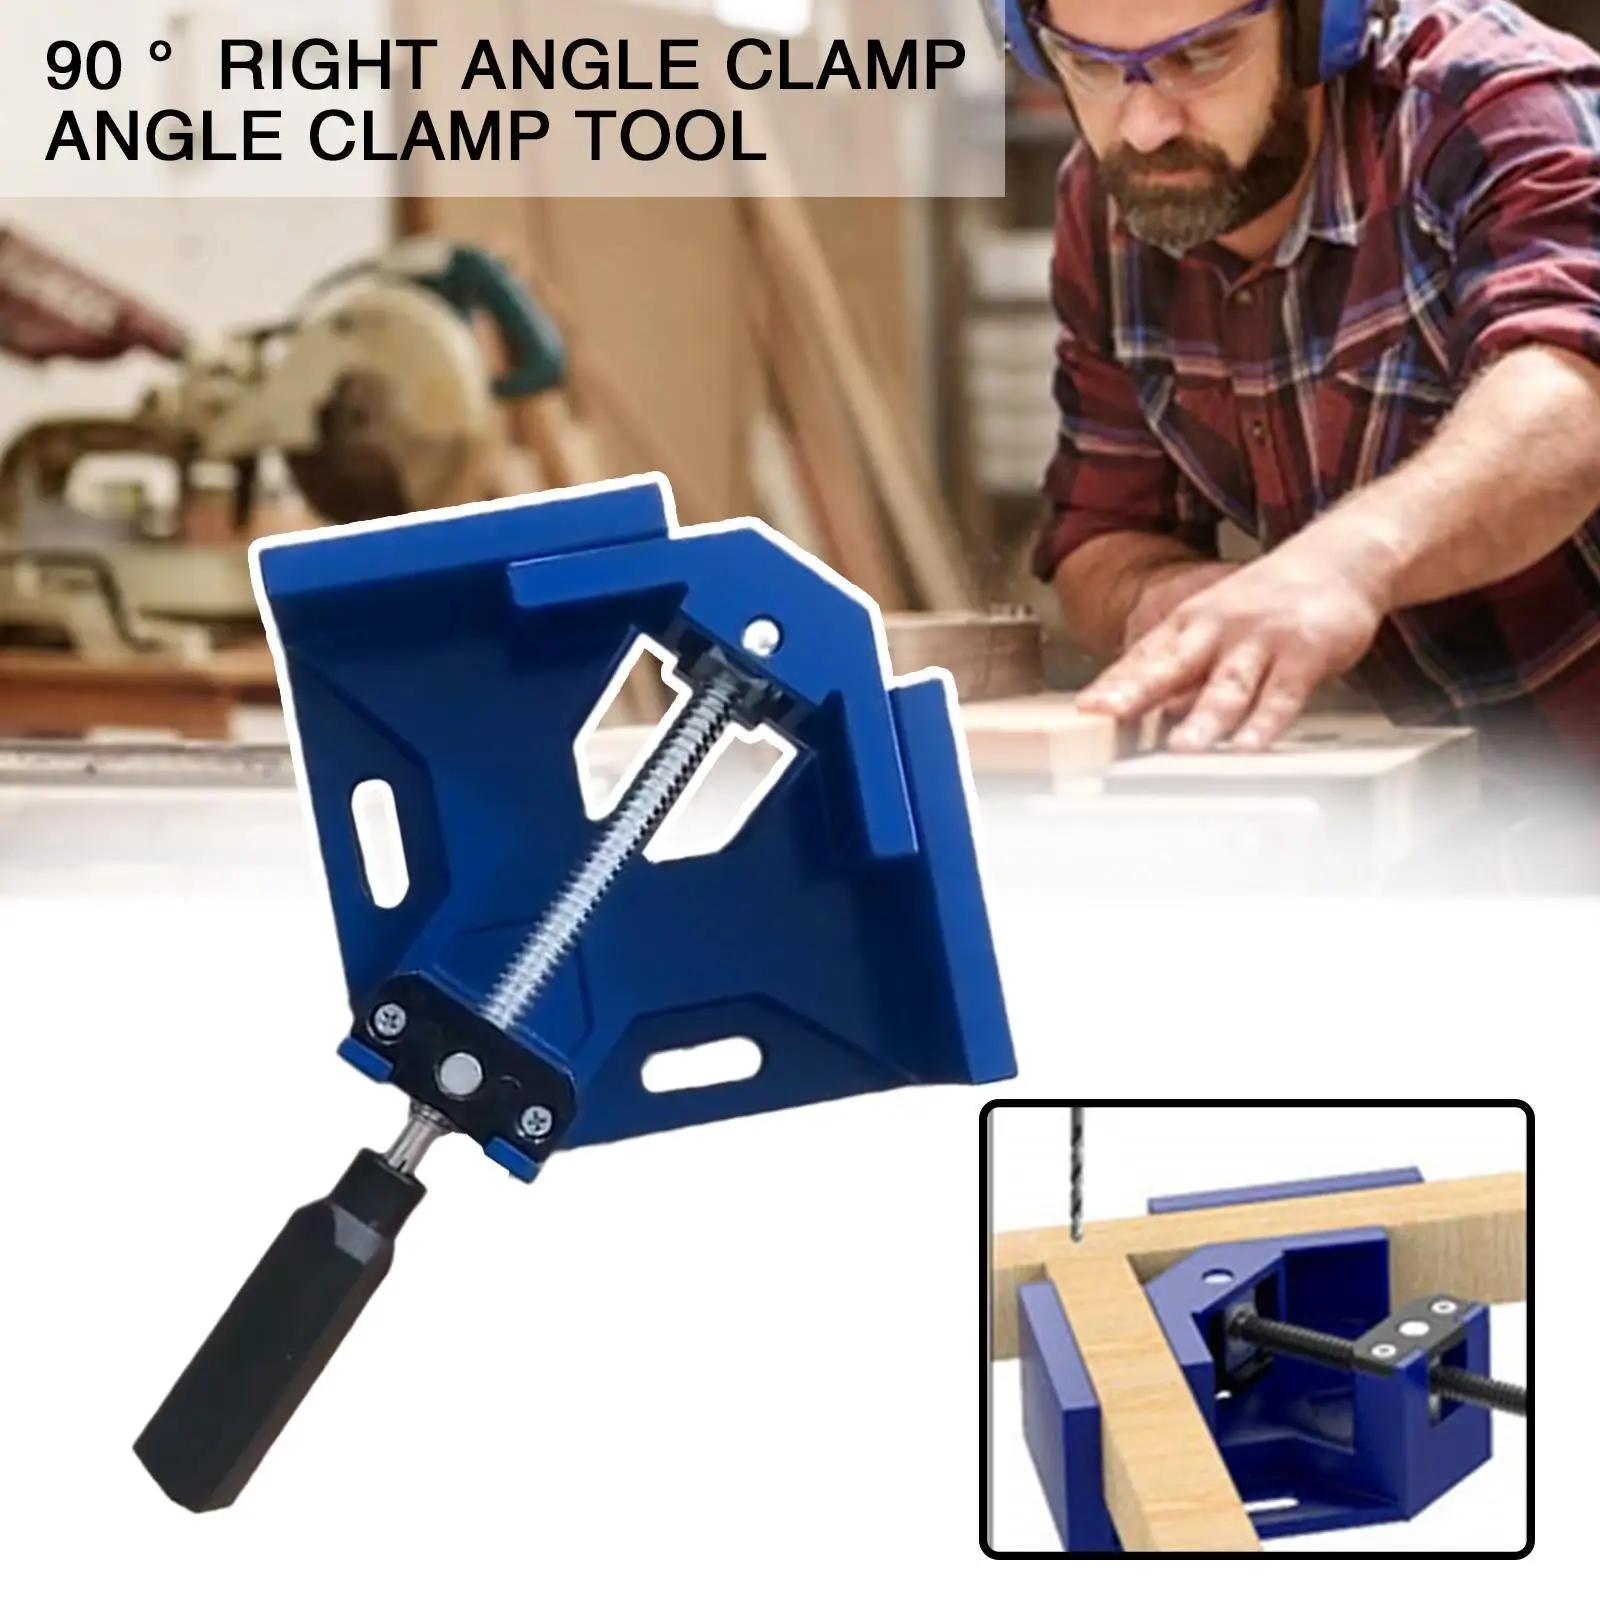 Gle corner clamp tools welding clamp carpentry presses woodworking clamps picture frame thumb200